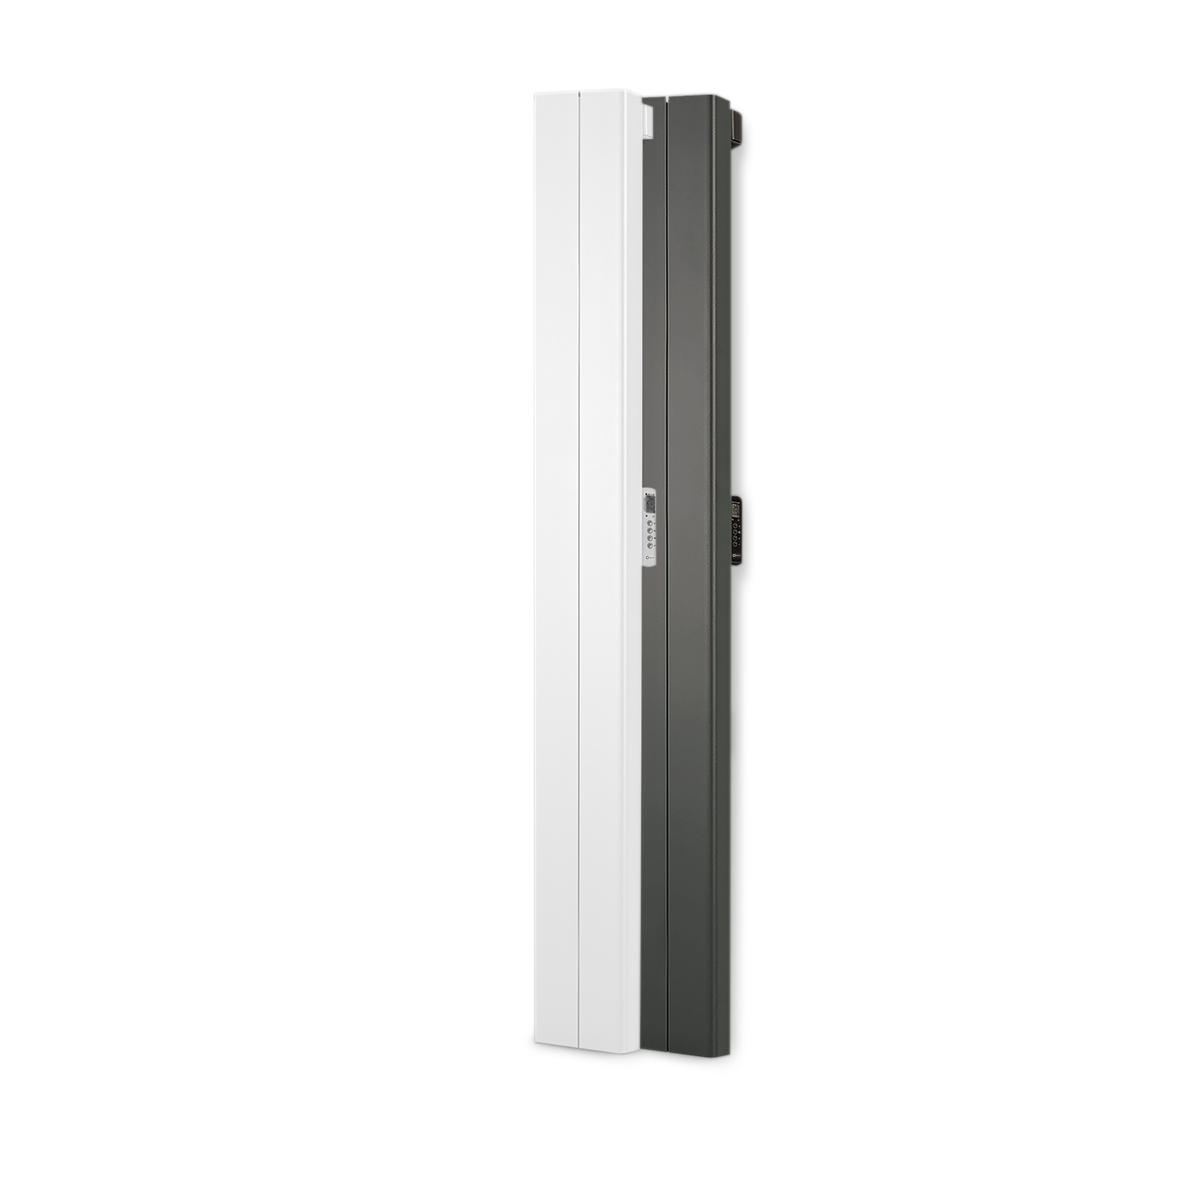 Rointe Palaos tall vertical radiators in white and black with 2 heating elements